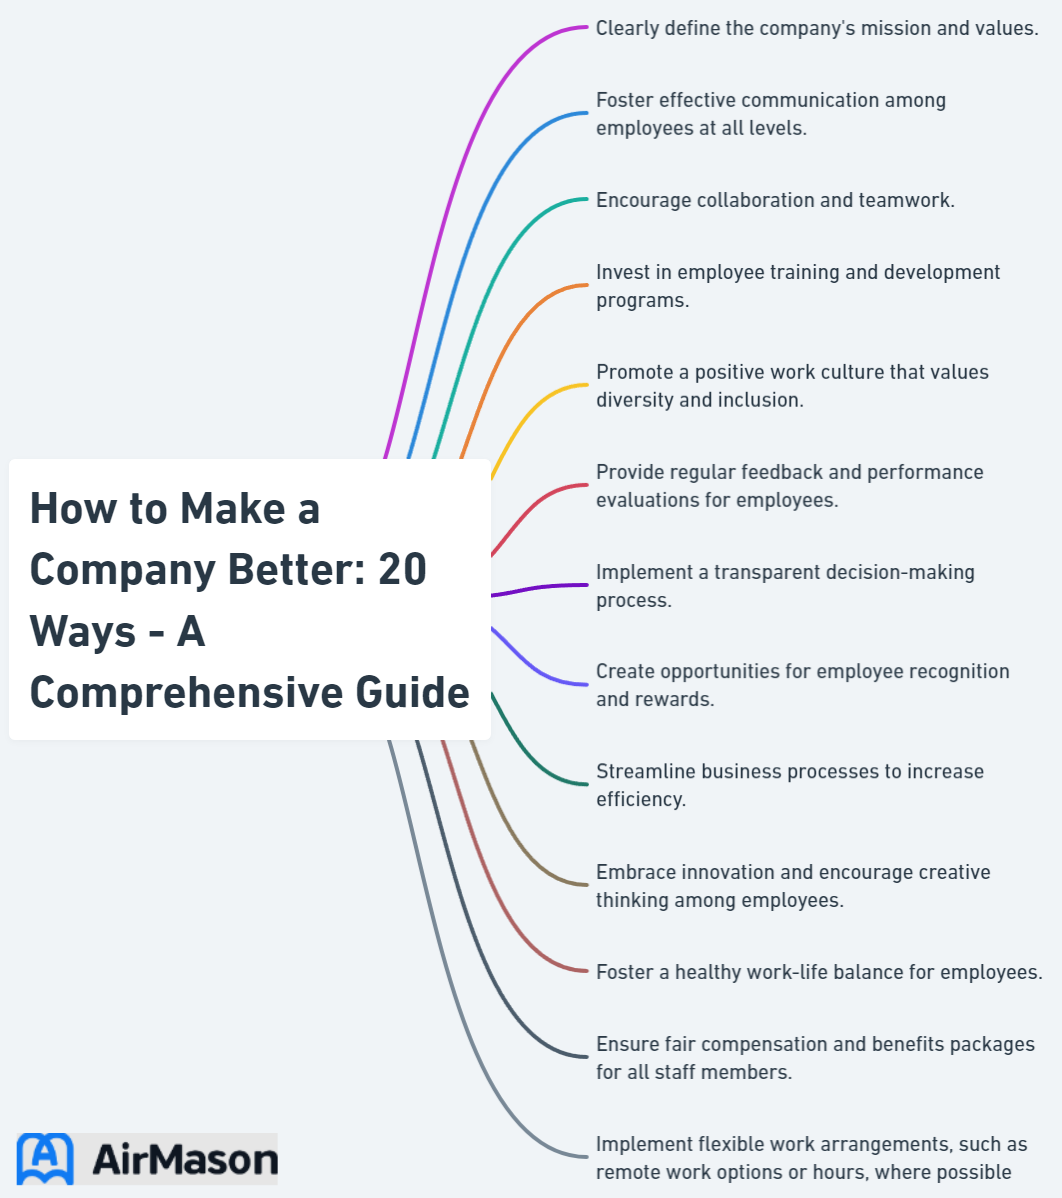 How to Make a Company Better: 20 Ways - A Comprehensive Guide